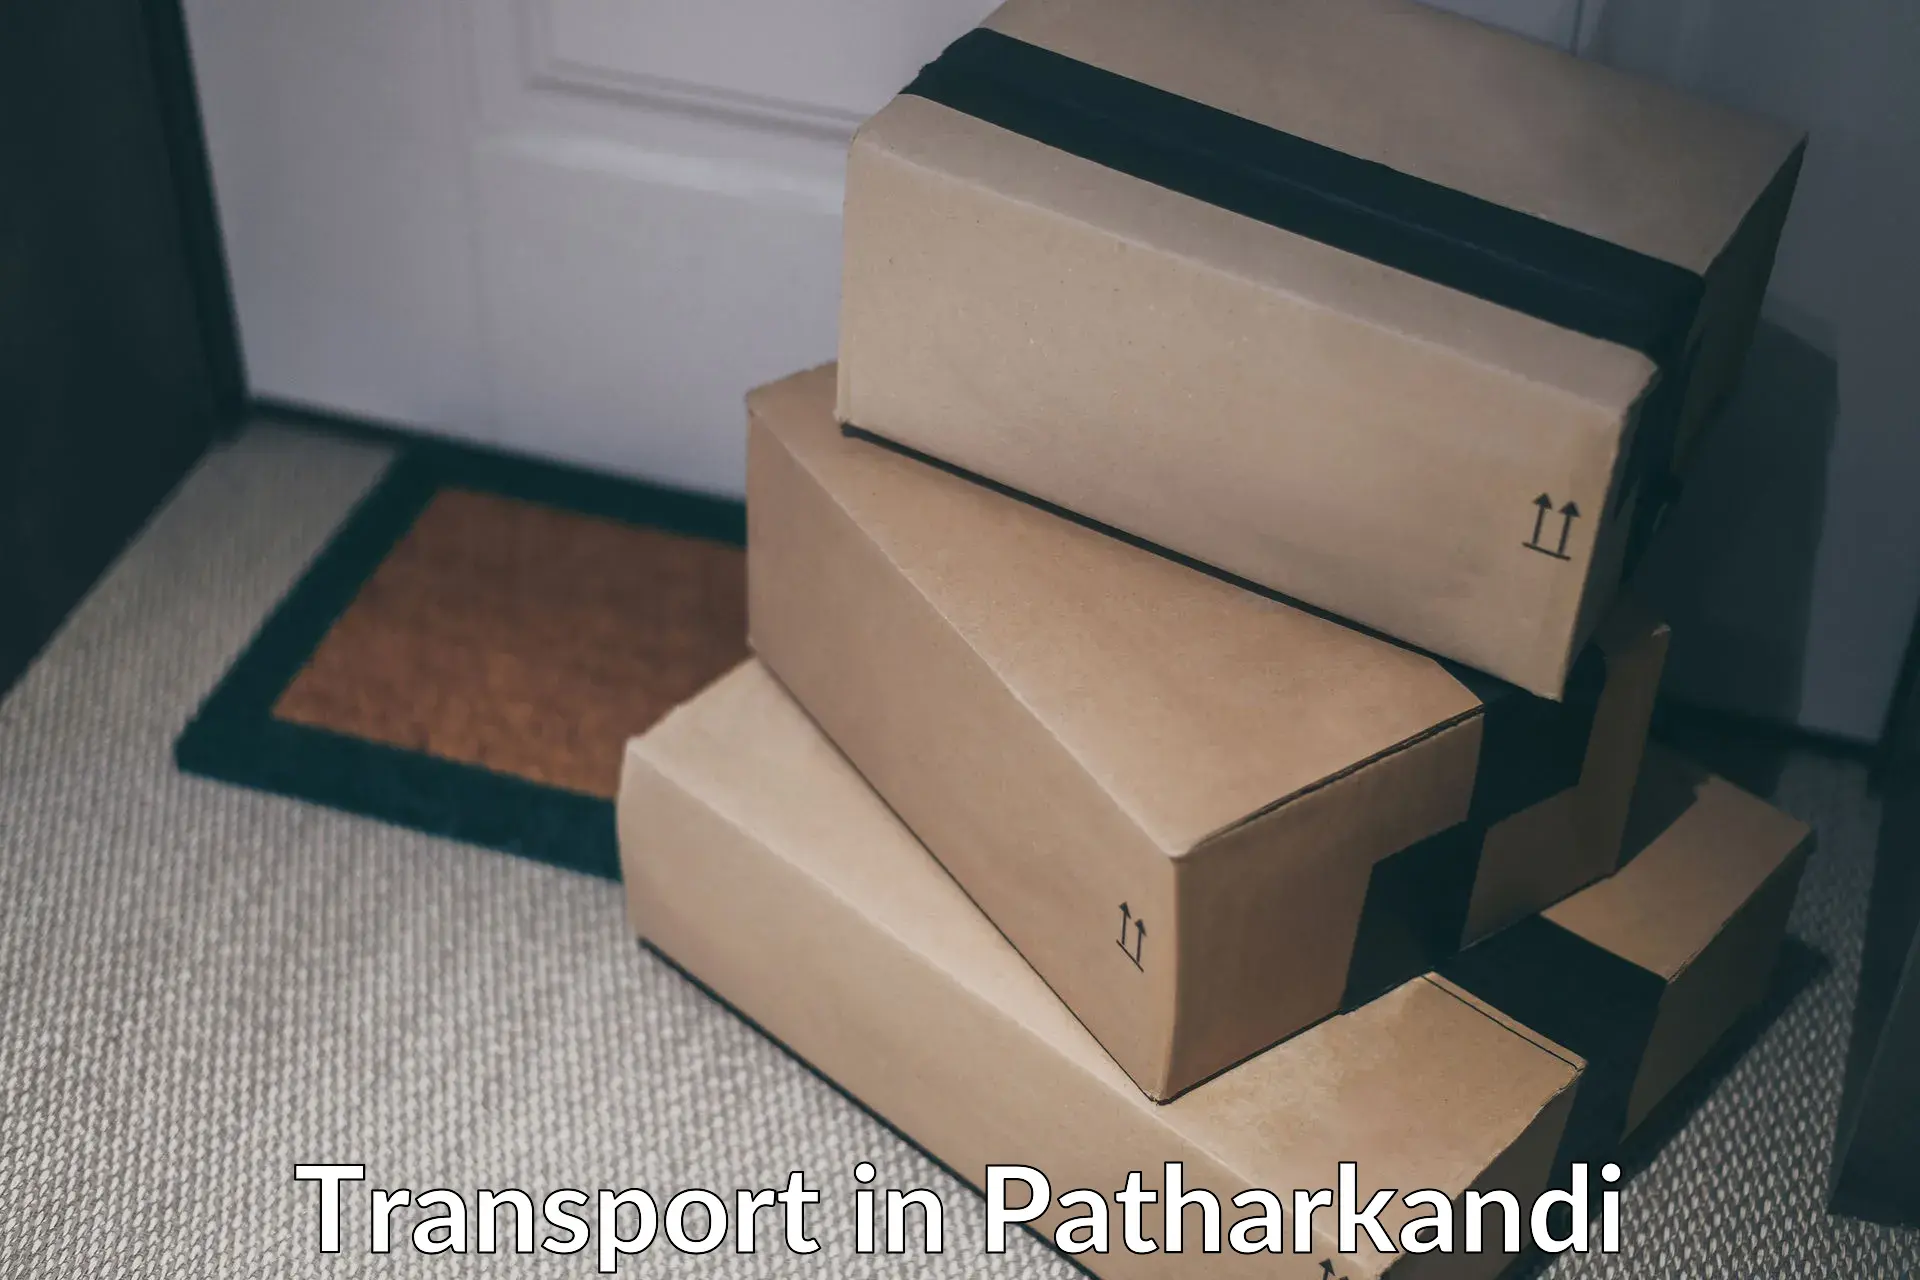 Daily parcel service transport in Patharkandi